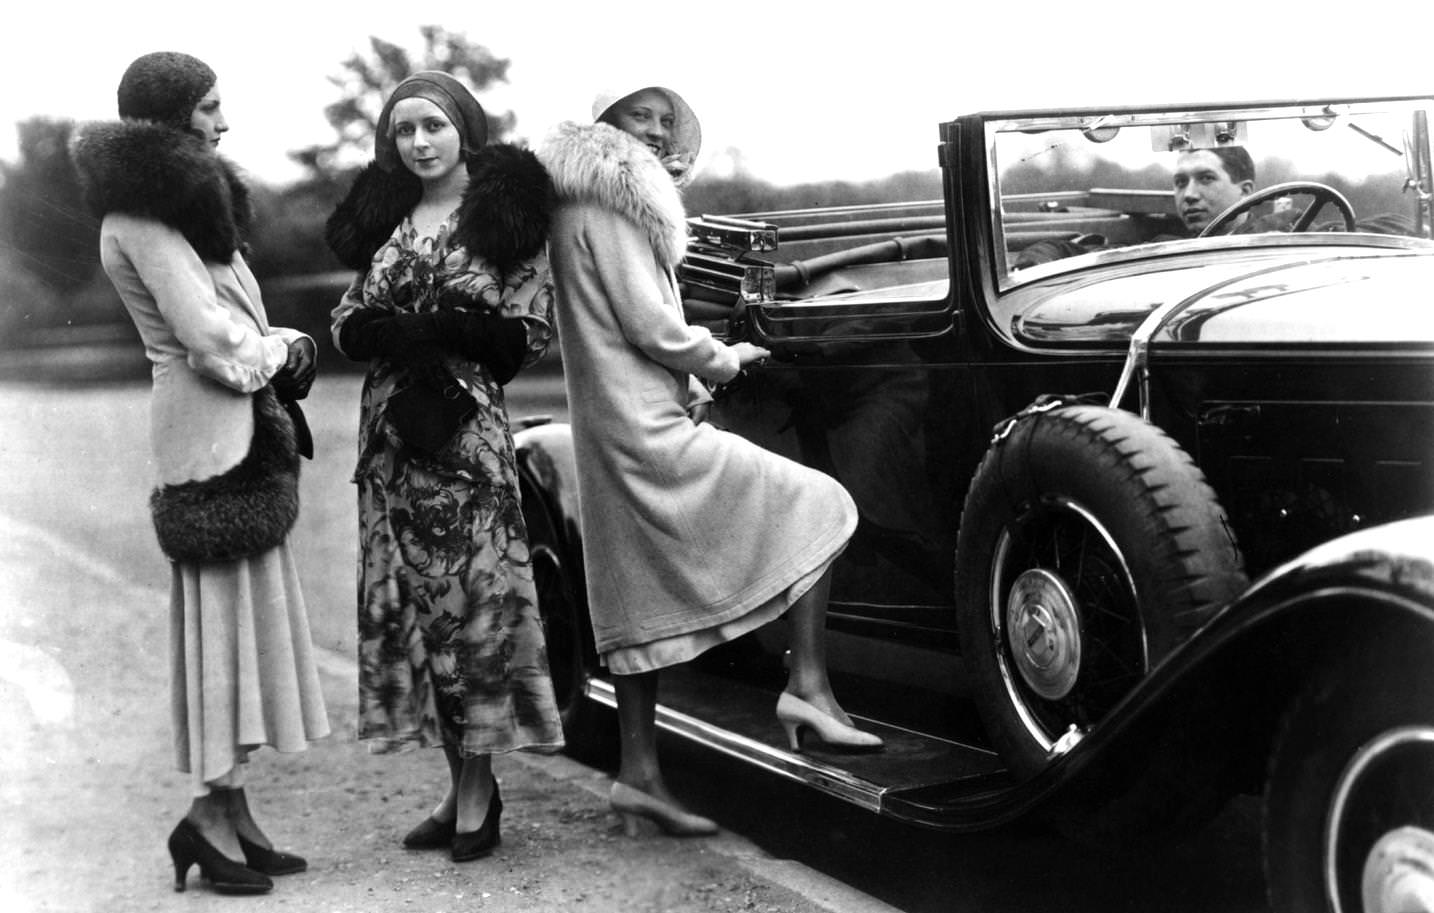 Women standing by a convertible car, wearing fur lined coats and cloche hats, 1920